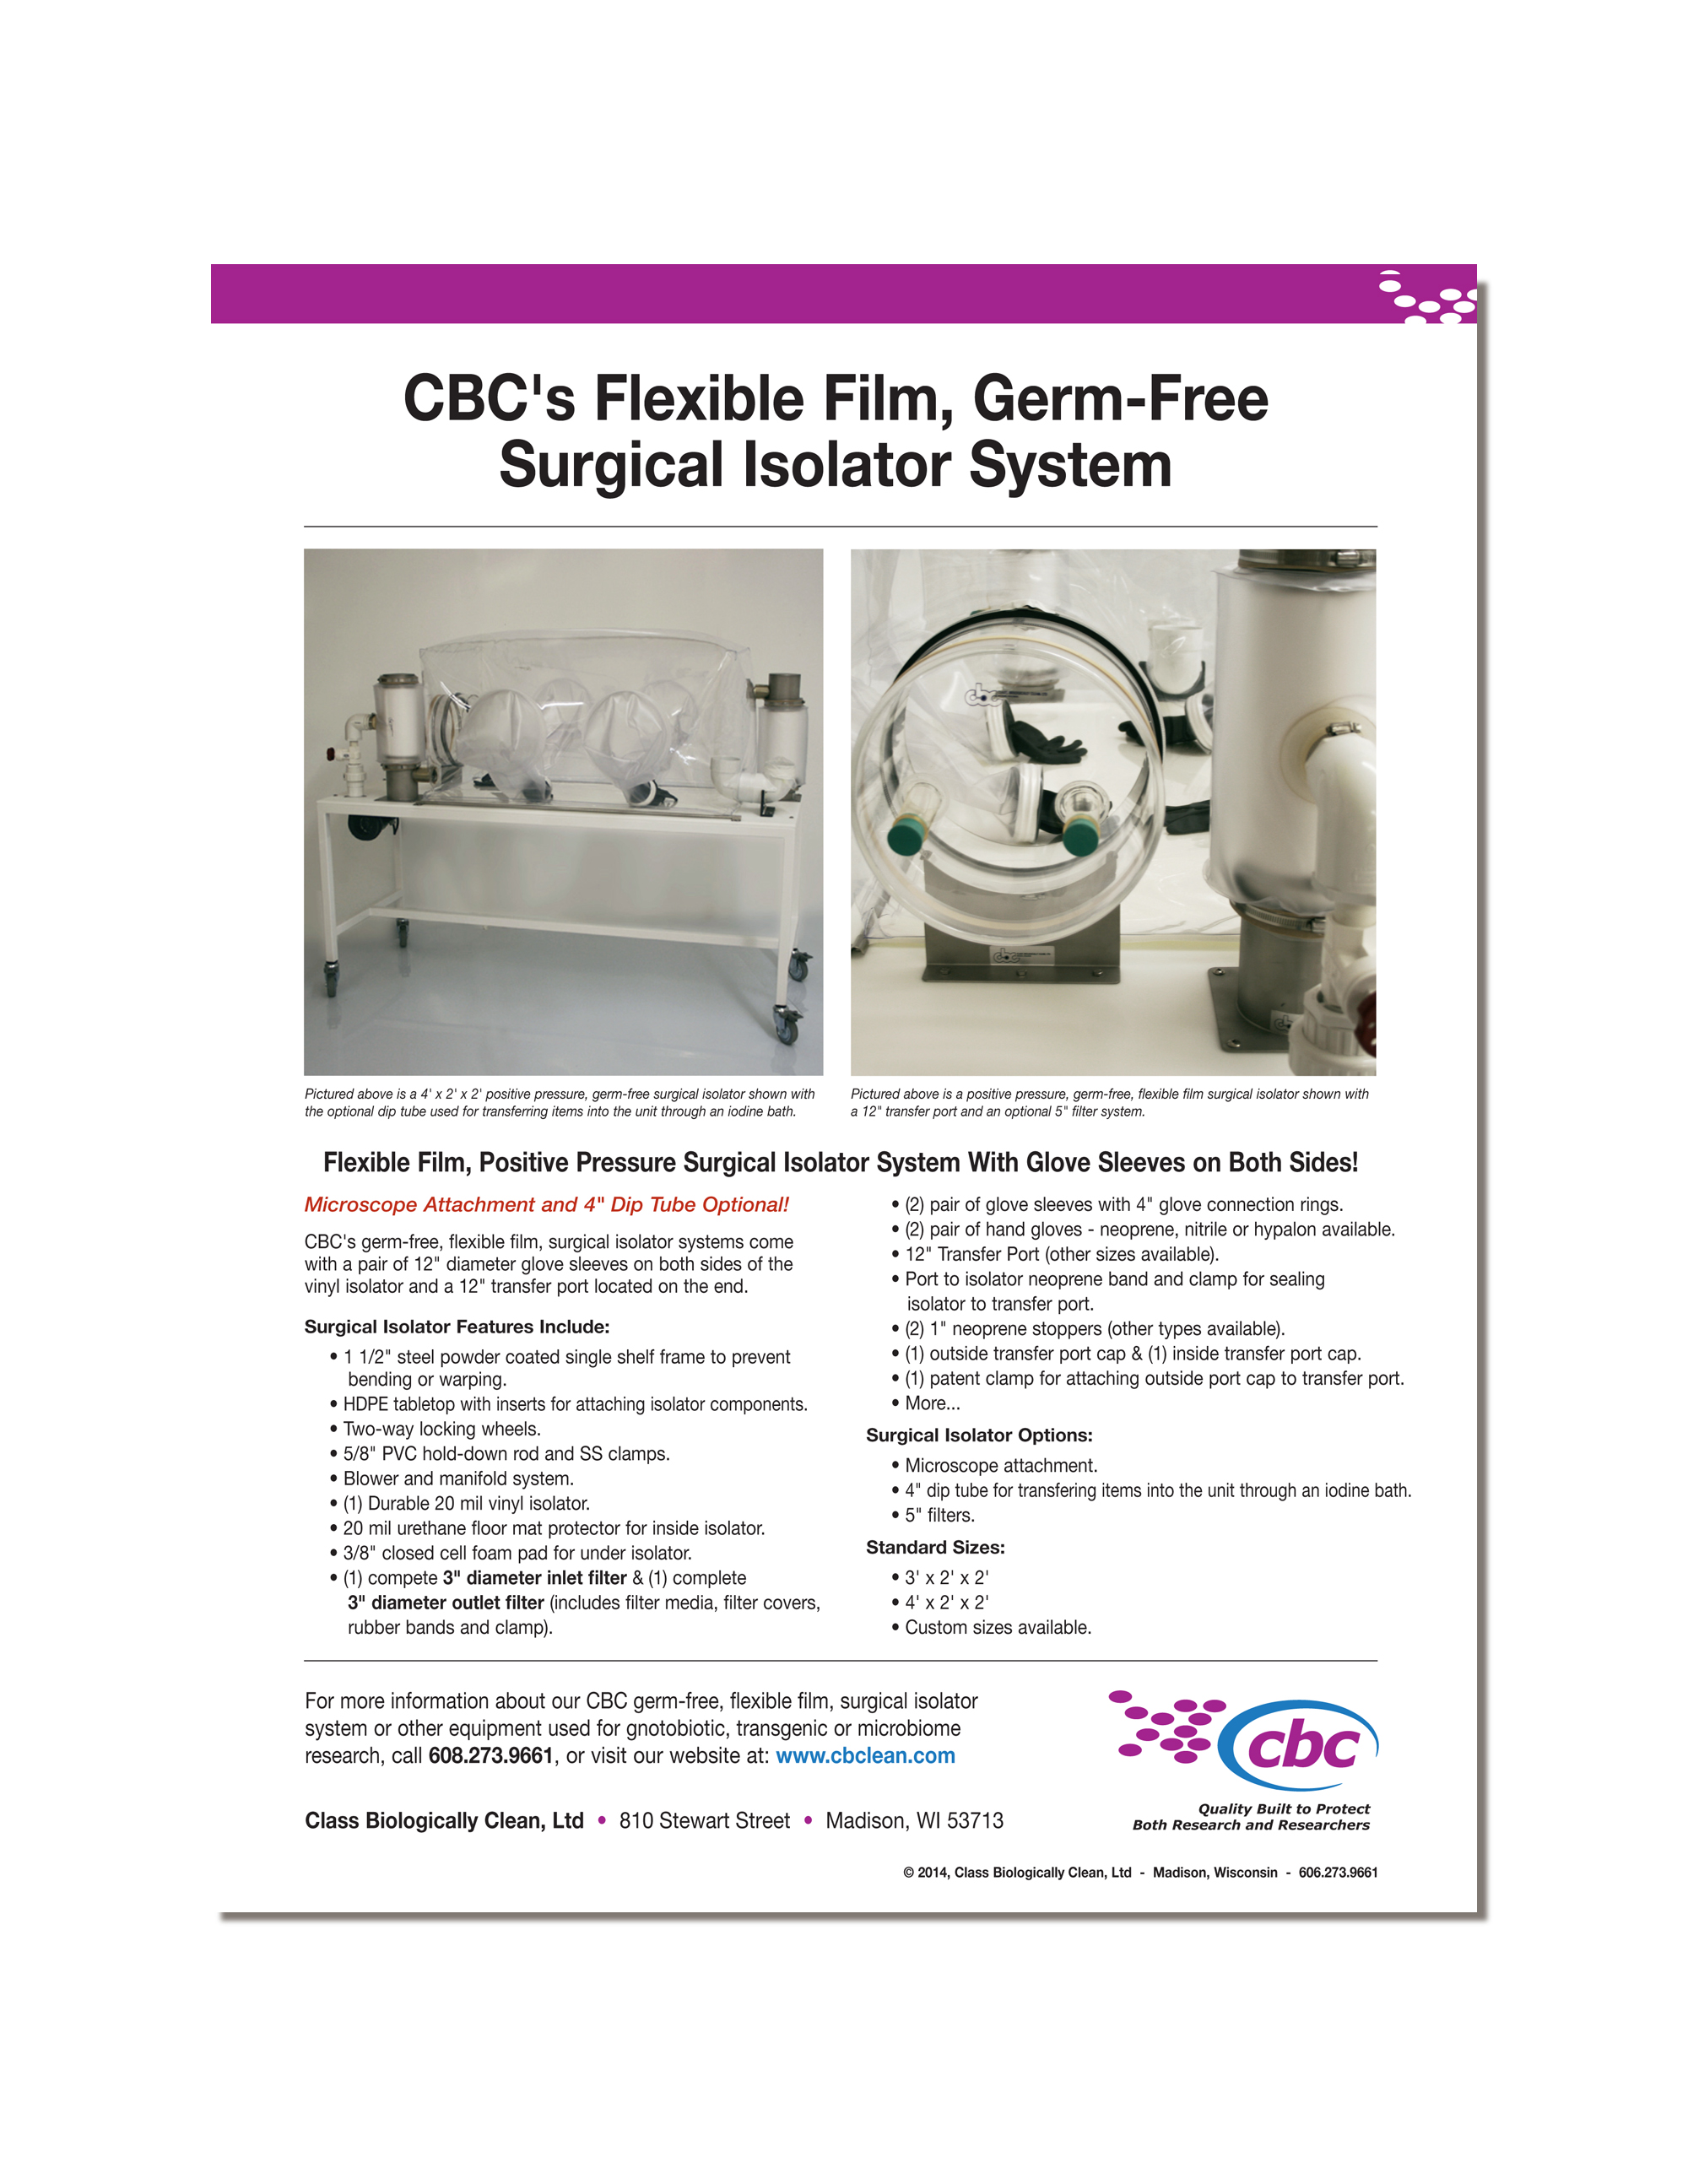 Download a printable flyer about CBC's positive pressure, flexible film Surgical Isolators for conducting medical/research procedures on gnotobiotic mice and other rodents. Click here to download flyer.